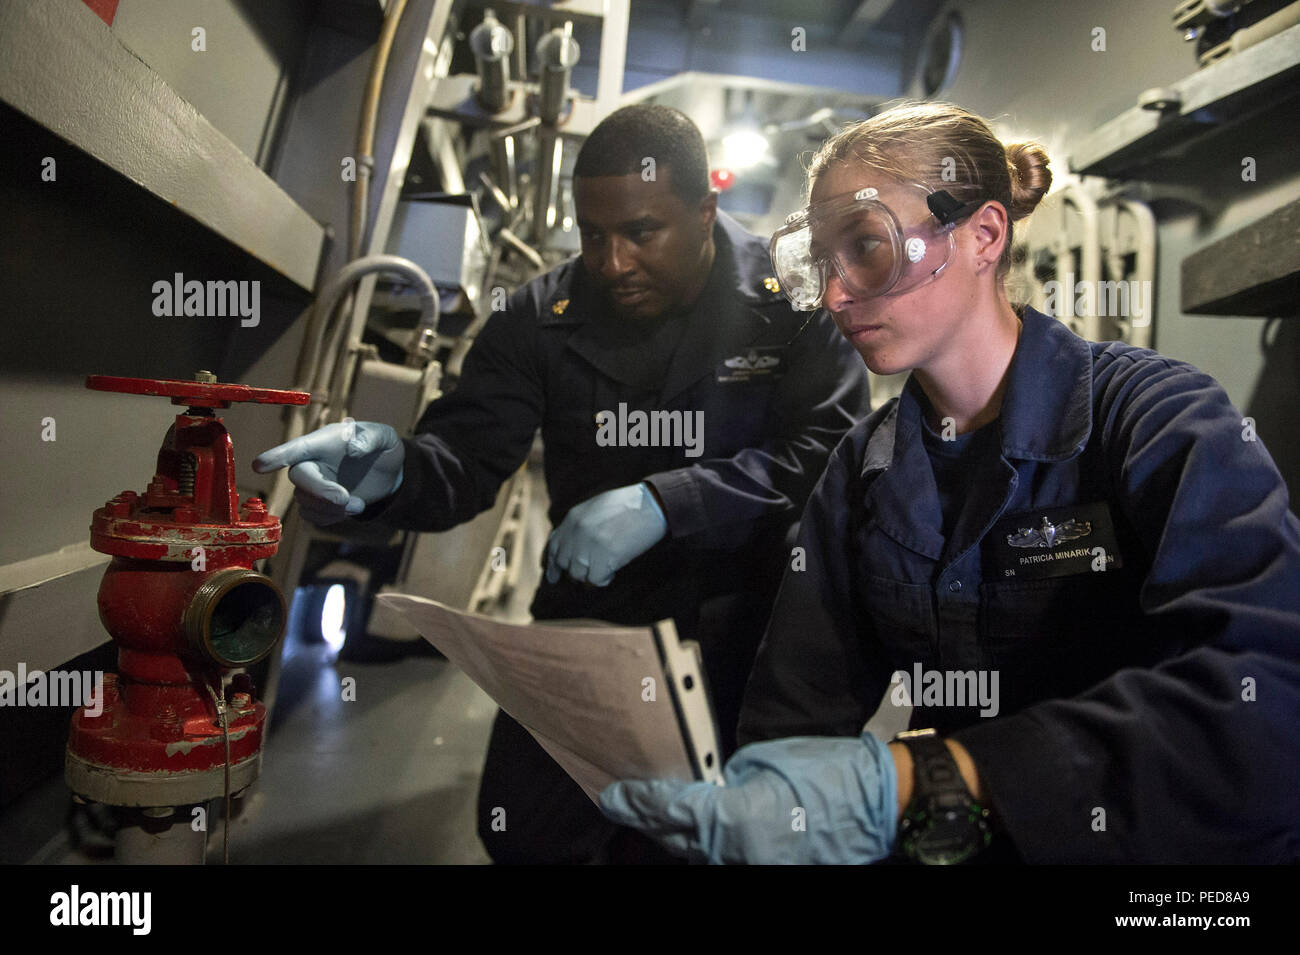 150804-N-UN259-208 WATERS SOUTH OF INDONESIA (Aug. 4, 2015) Chief Boatswains Mate Jabri Turner (left), from New Orleans, La., guides Boatswains Mate Seaman Patricia Minarik, from Twentynine Palms, Calif., on the procedures of valve maintenance on board the Arleigh Burke-class guided-missile destroyer USS Preble (DDG 88). Preble is deployed to the 7th Fleet area of responsibility in support of security and stability in the Indo-Asia-Pacific region. (U.S. Navy photo by Mass Communication Specialist 3rd Class Alonzo M. Archer/Released) Stock Photo